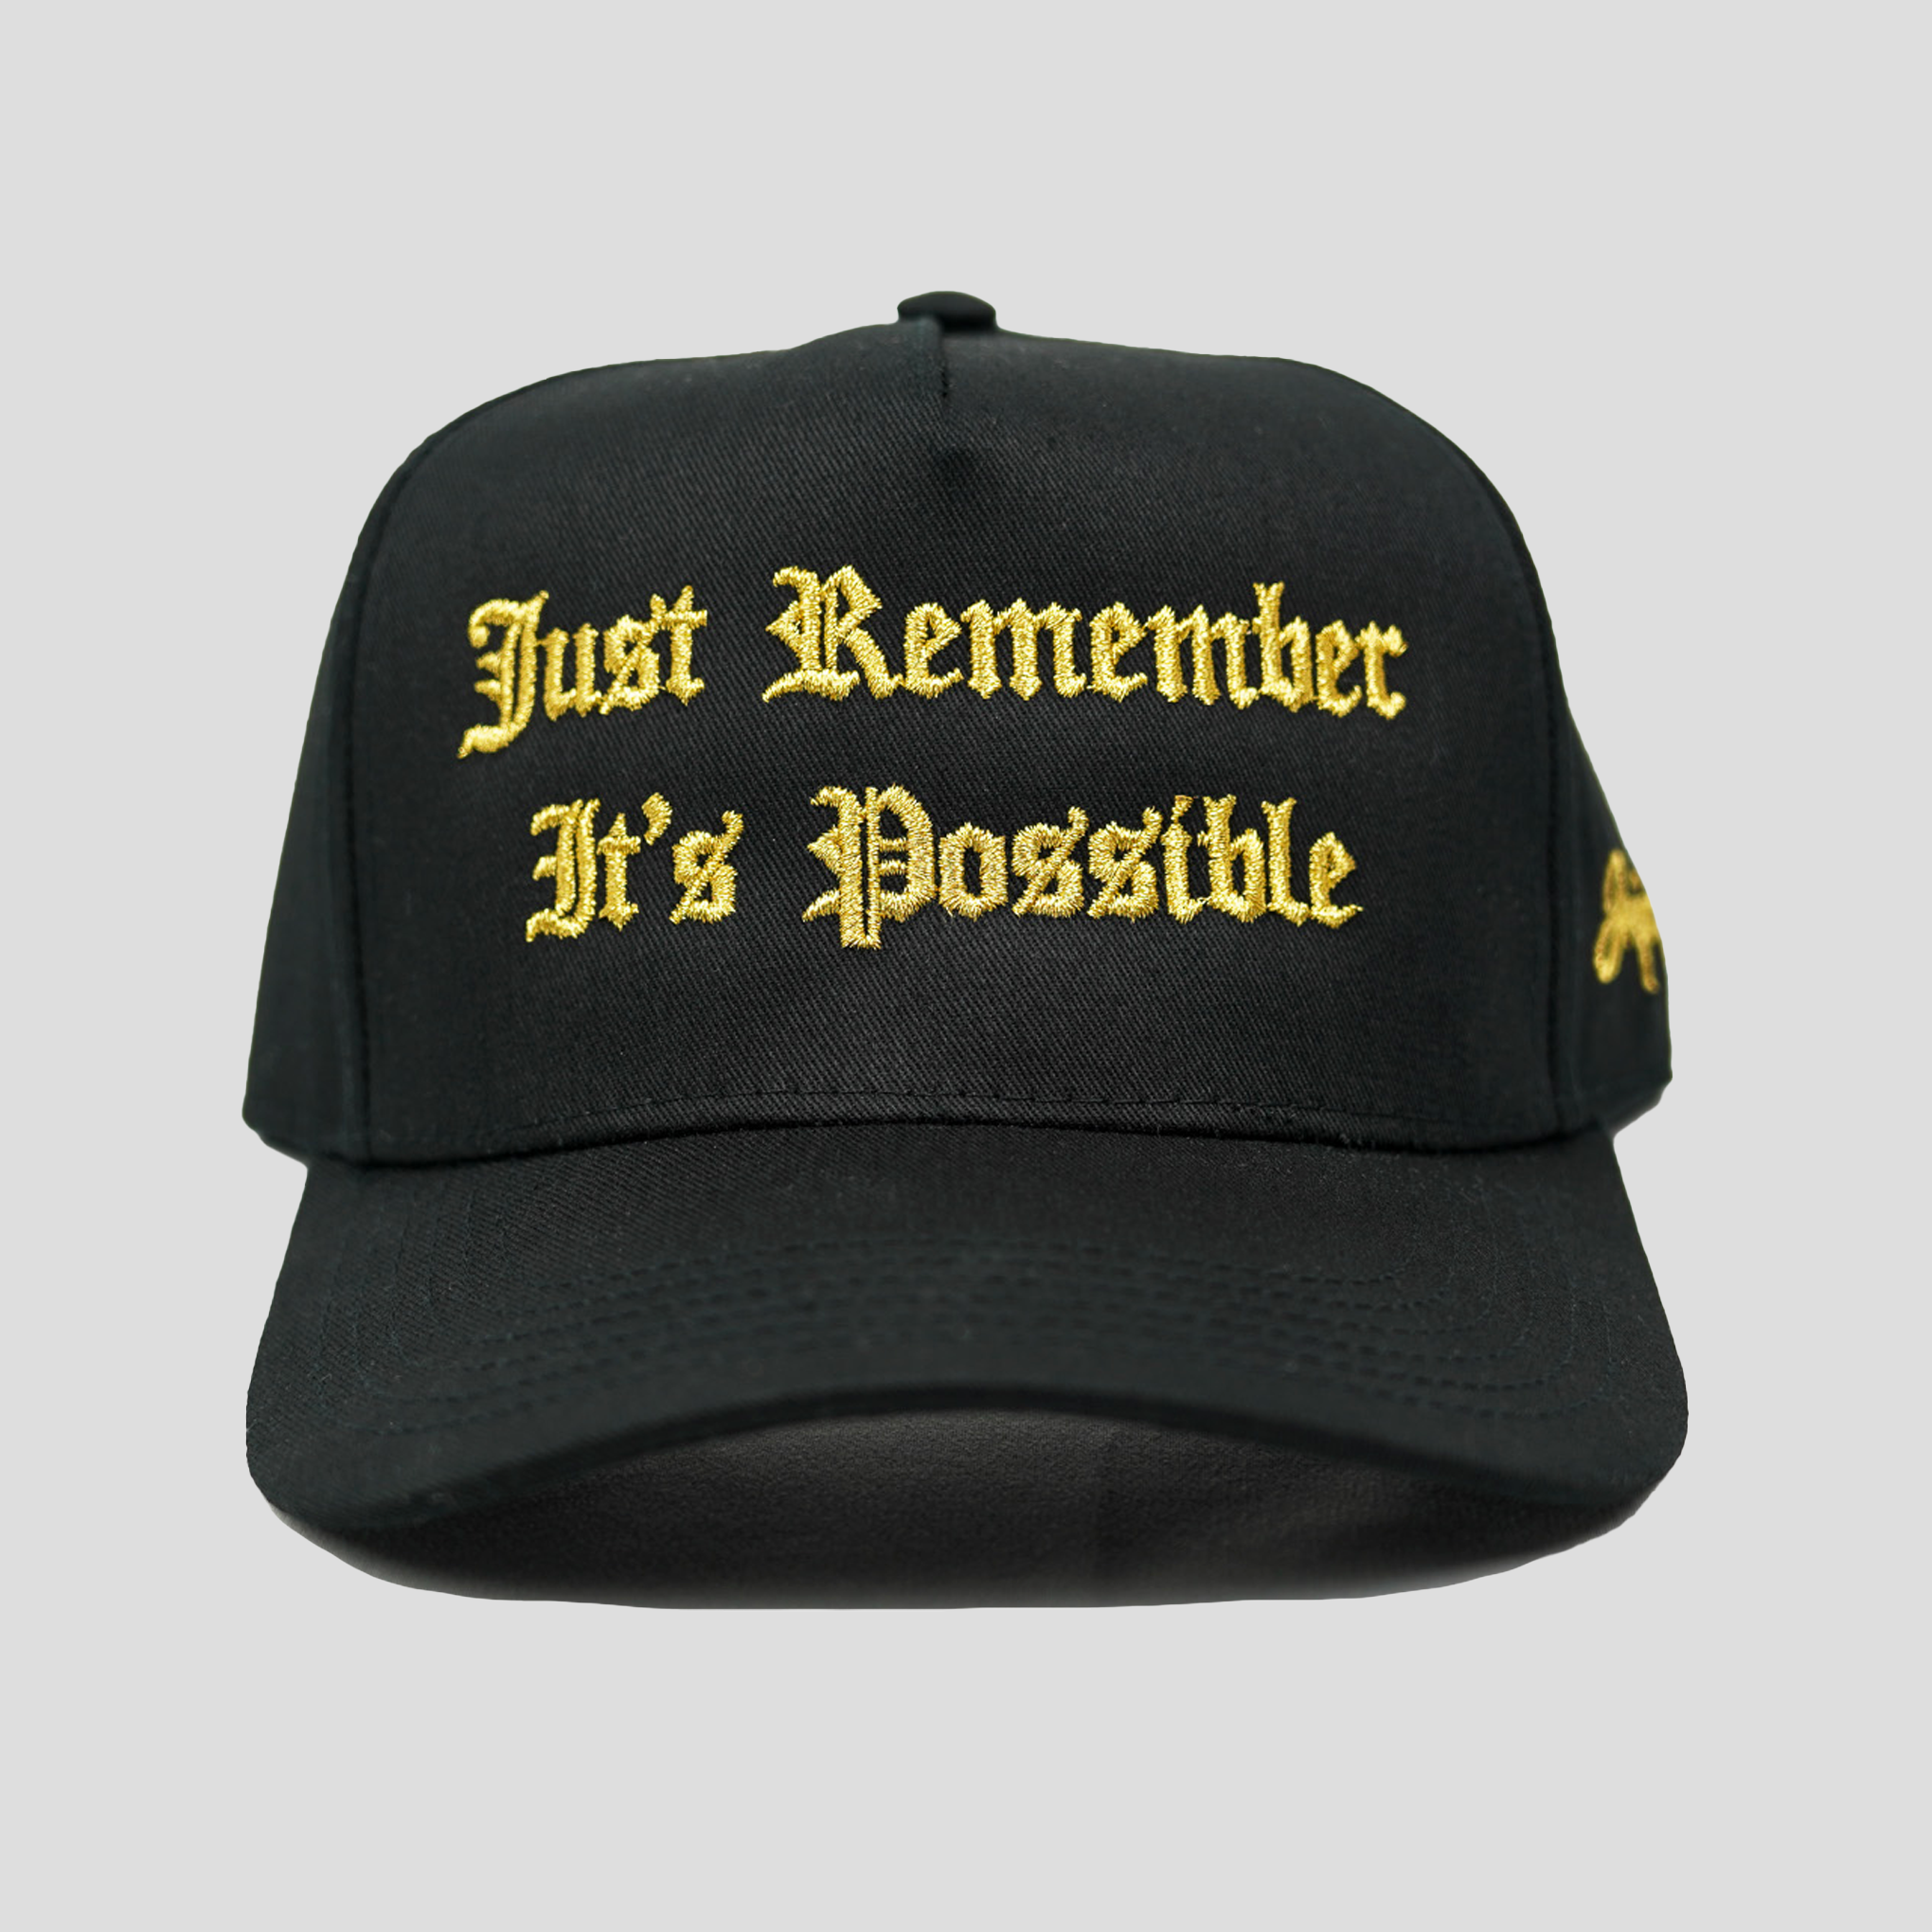 Just Remember It's Possible Snapback (BLACK/GOLD)